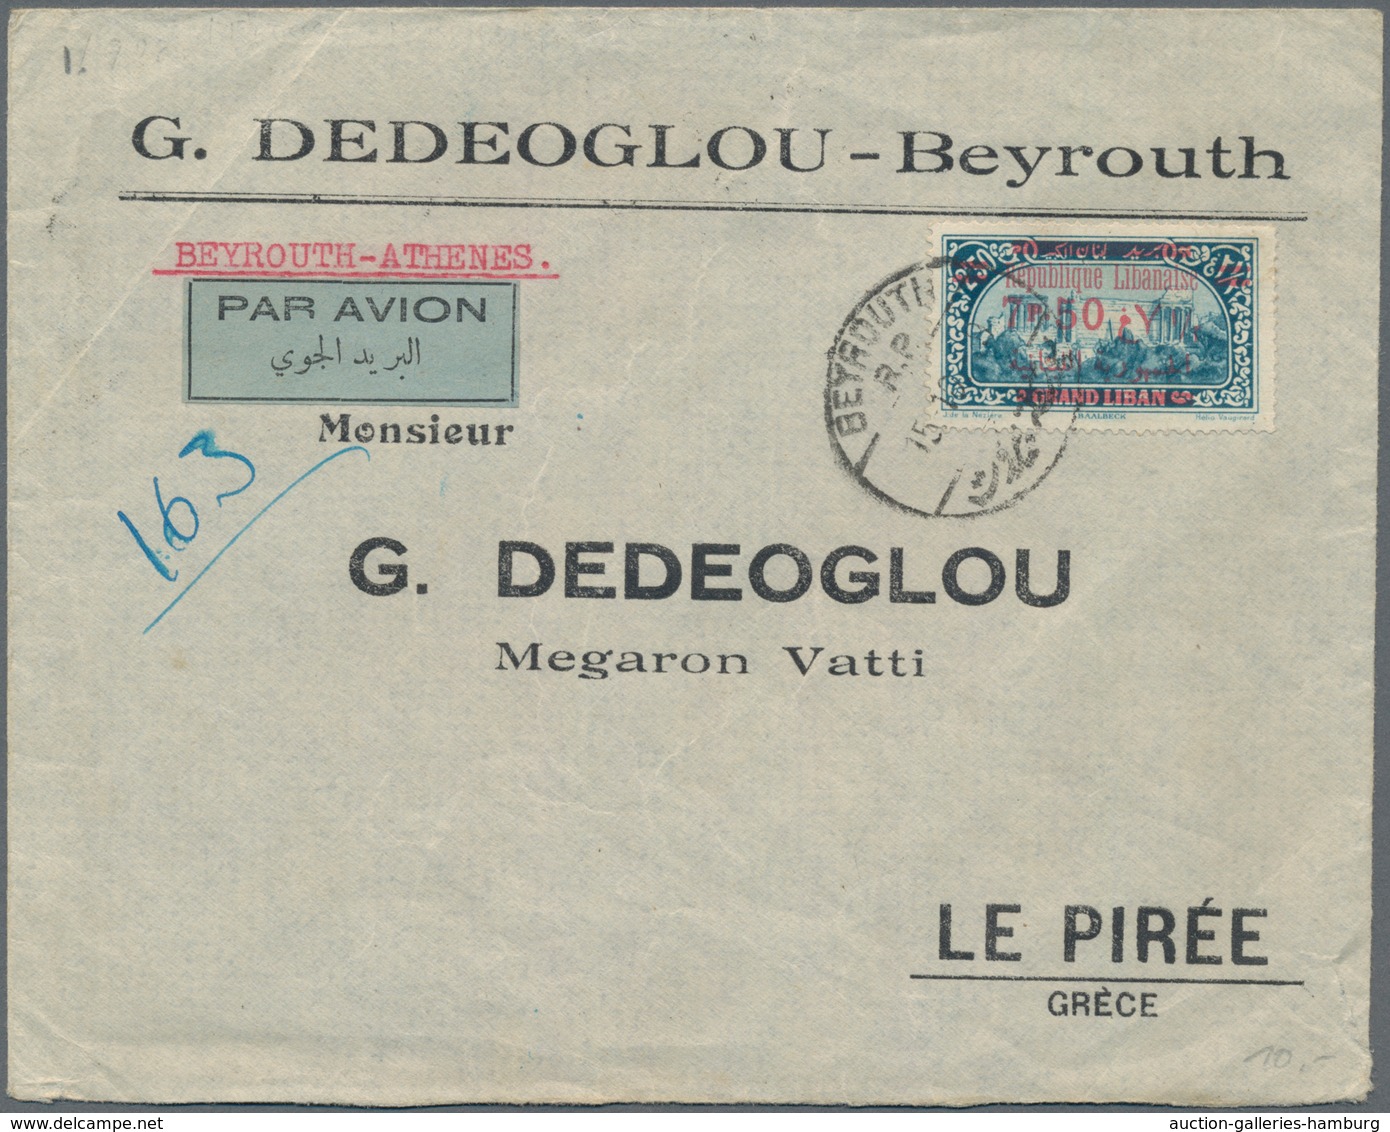 Libanon: 1929 Airmail Cover From Beyrouth To Piraeus, Greece By Beyrouth-Athens Flight, Franked On F - Libanon